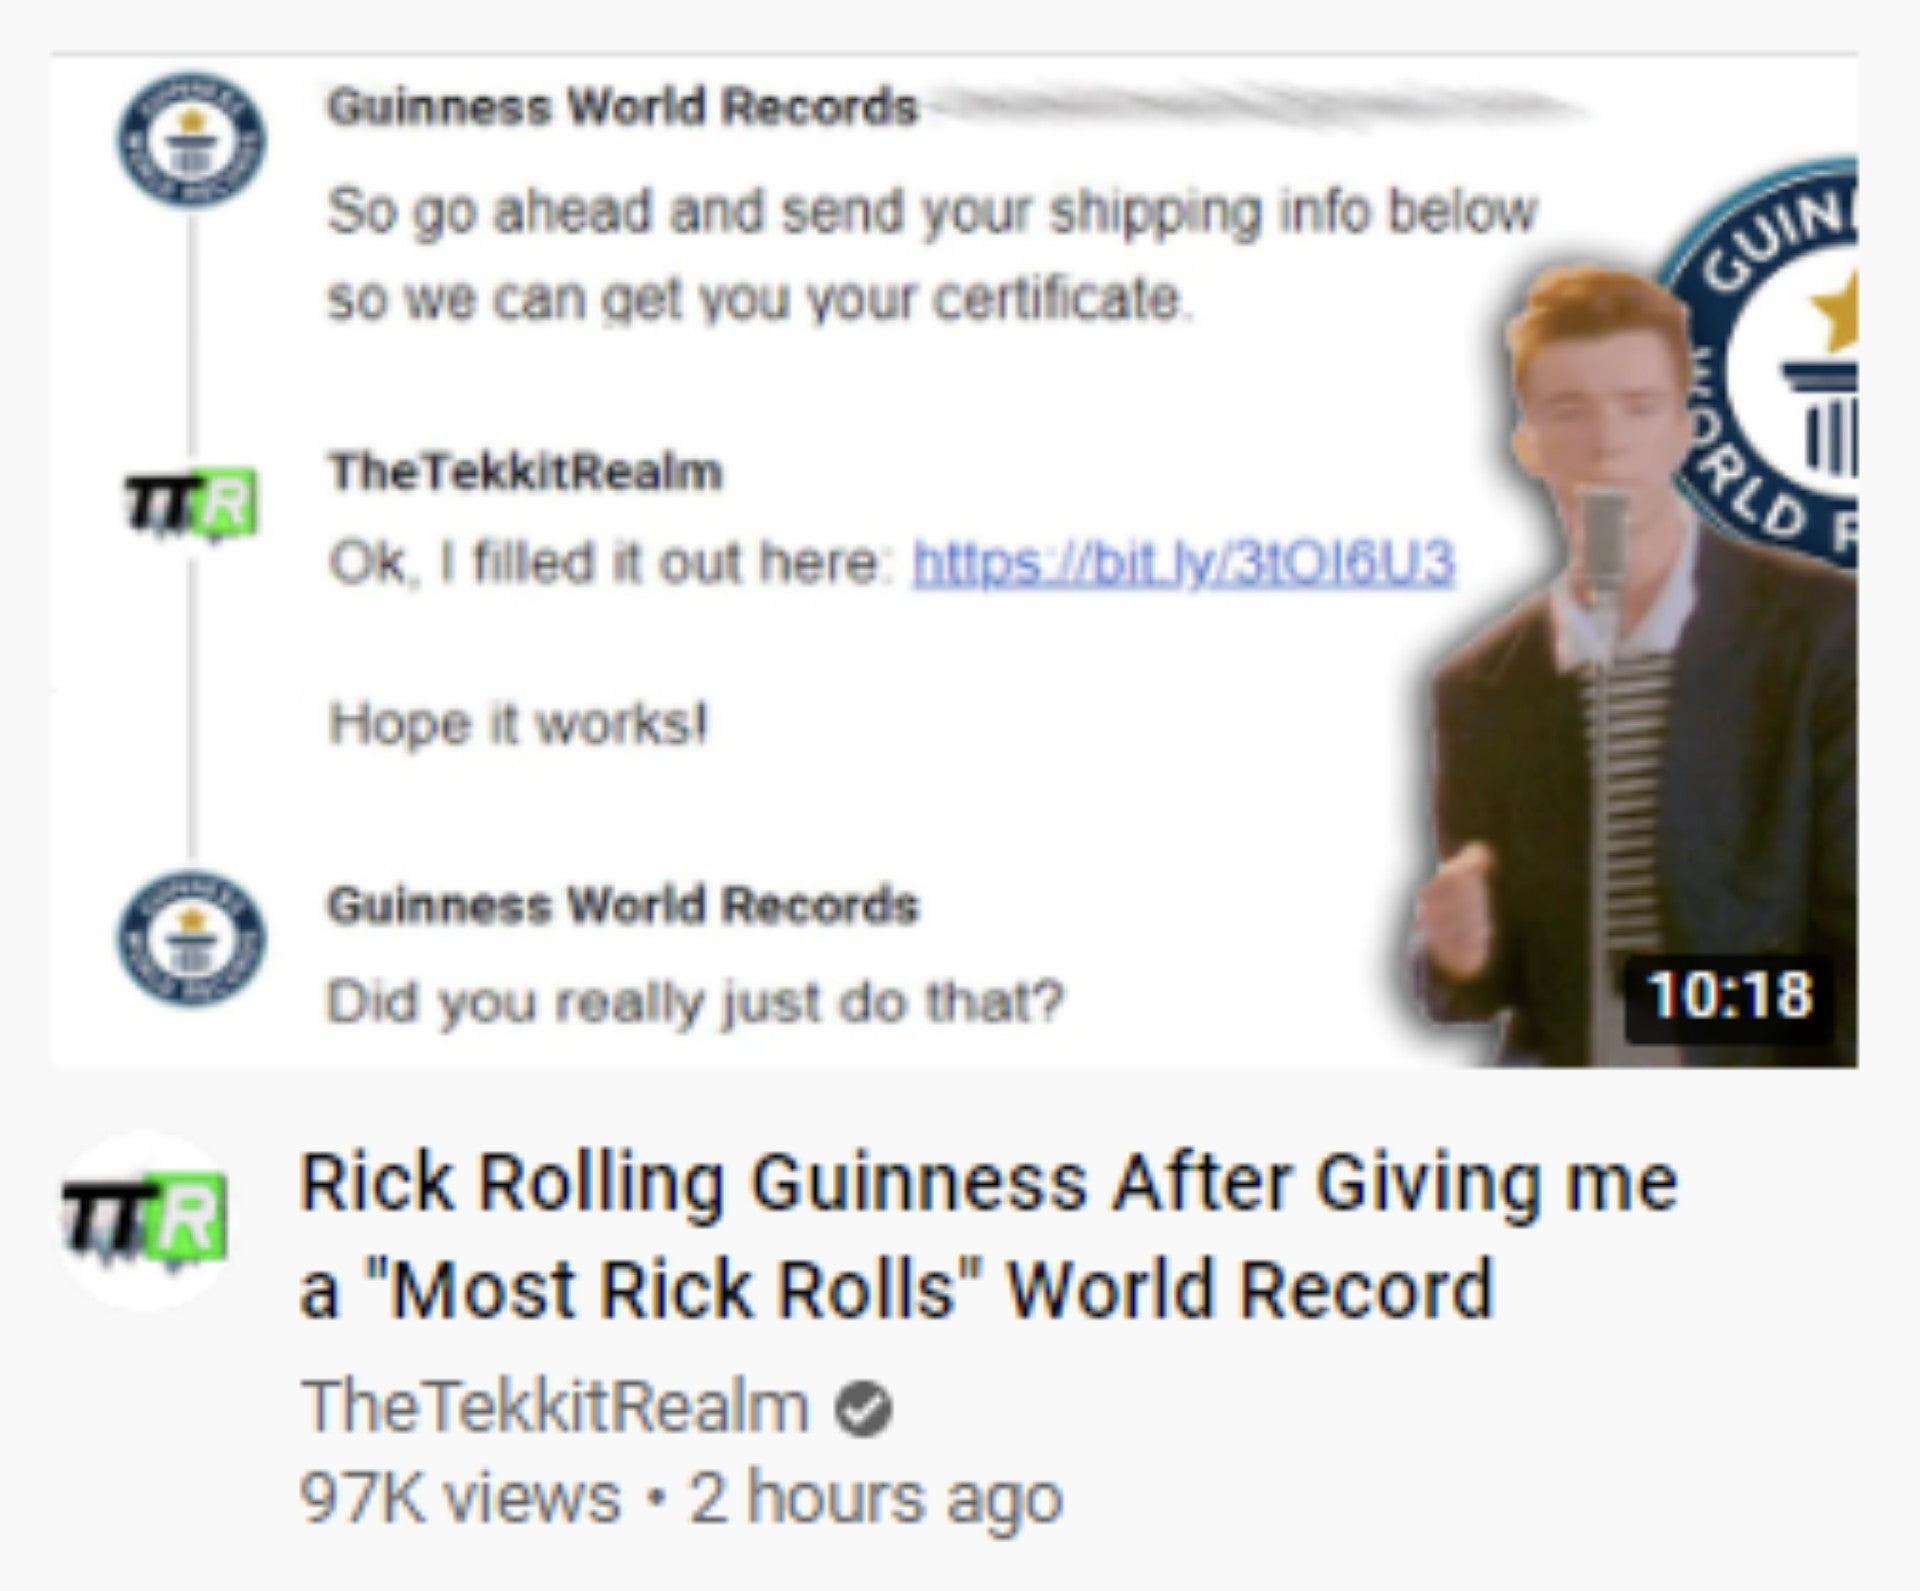 software - Guinness World Records So go ahead and send your shipping info below so we can get you your certificate Guin Prld ill Ita The TekkitRealm Ok, I filled it out here Hope it works! Guinness World Records Did you really just do that? Ttr Rick Rolli